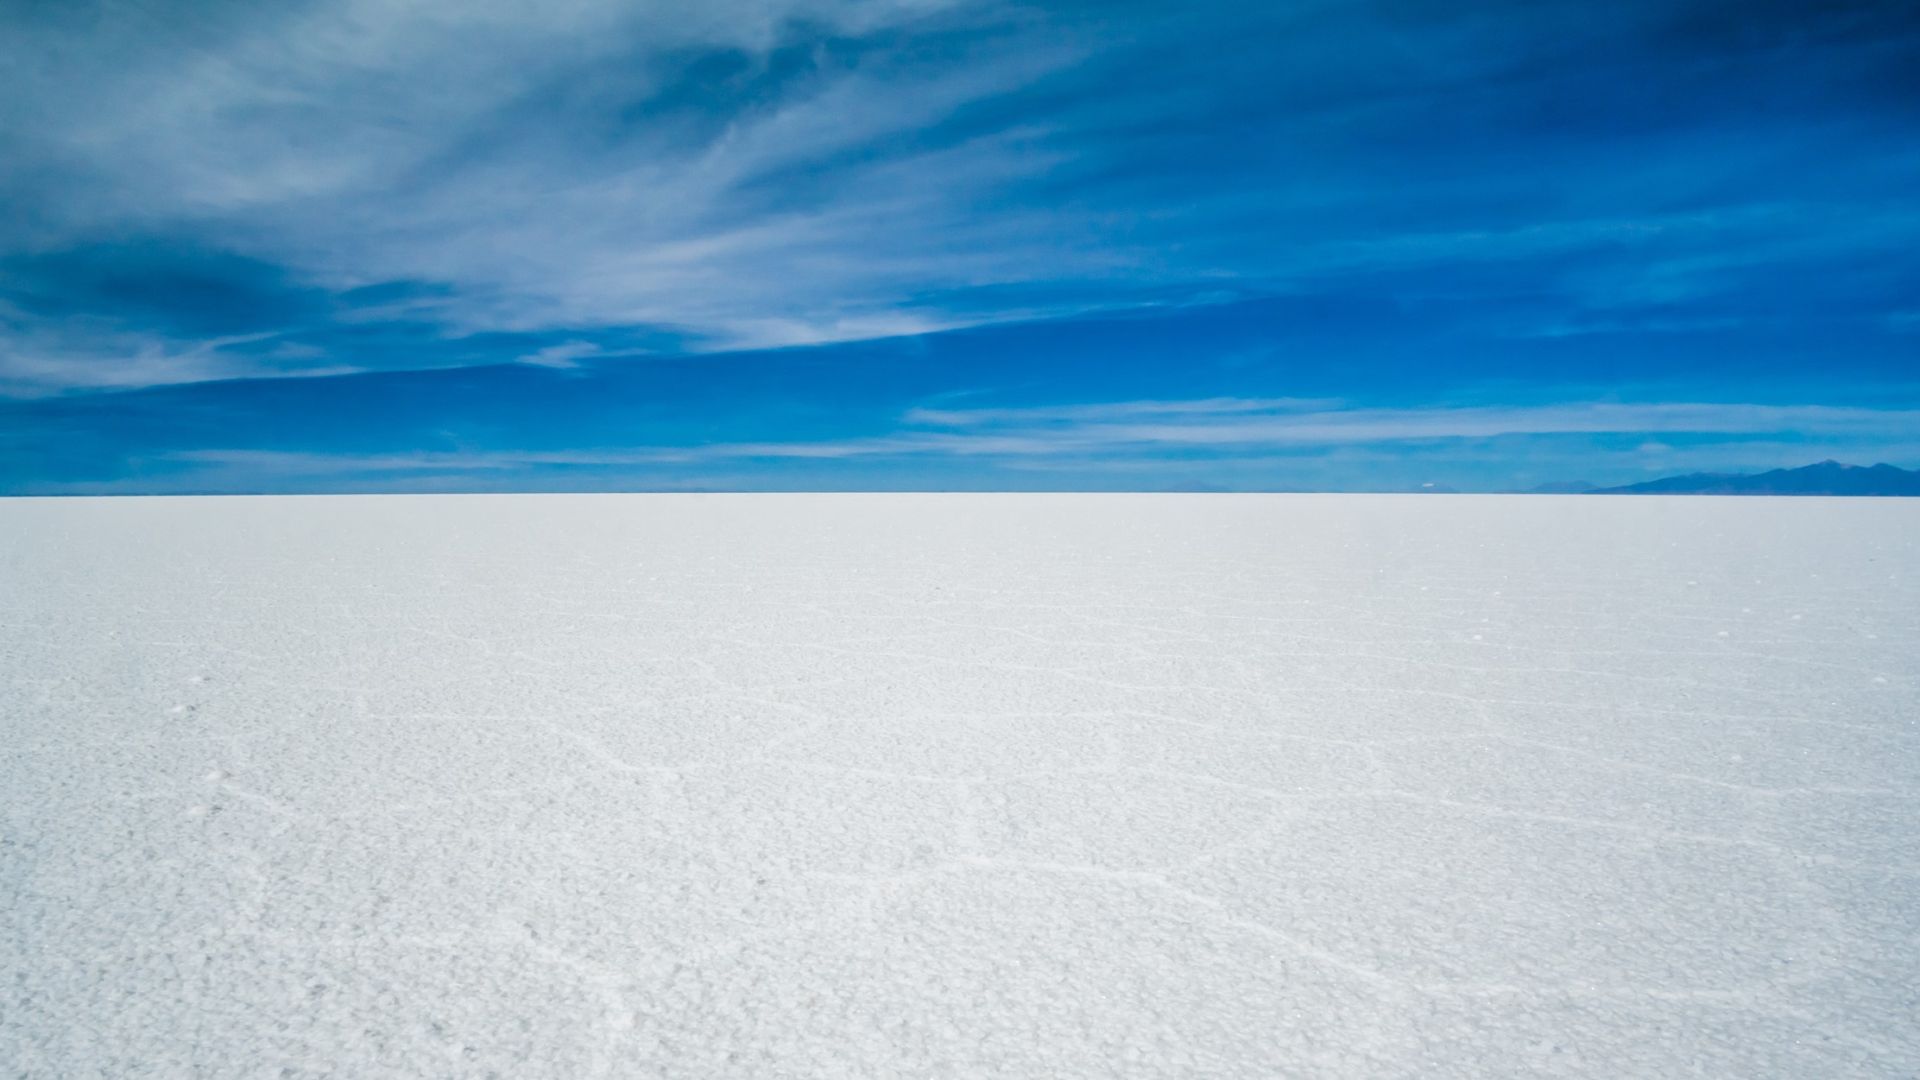 <p>                     The Salar de Uyuni in Bolivia is the largest salt flat in the world, spanning over 3,800 square miles (10,000 sqaure km), according to the European Space Agency The colossal salt flat is so large it can be seen from space.                    </p>                                      <p>                     The salt flat can reach depths of 32 feet (10 m) in its center. According to the travel website Salardeuyuni.com, Salar de Uyuni contains over 10 billion tons of salt. Interestingly, 70% of the world's lithium reserves are also found beneath the monumental salt flat.                    </p>                                      <p>                     These alluring salt flats in Bolivia's surreal Altiplano are a must-visit for those eager to experience something extraordinary.                   </p>